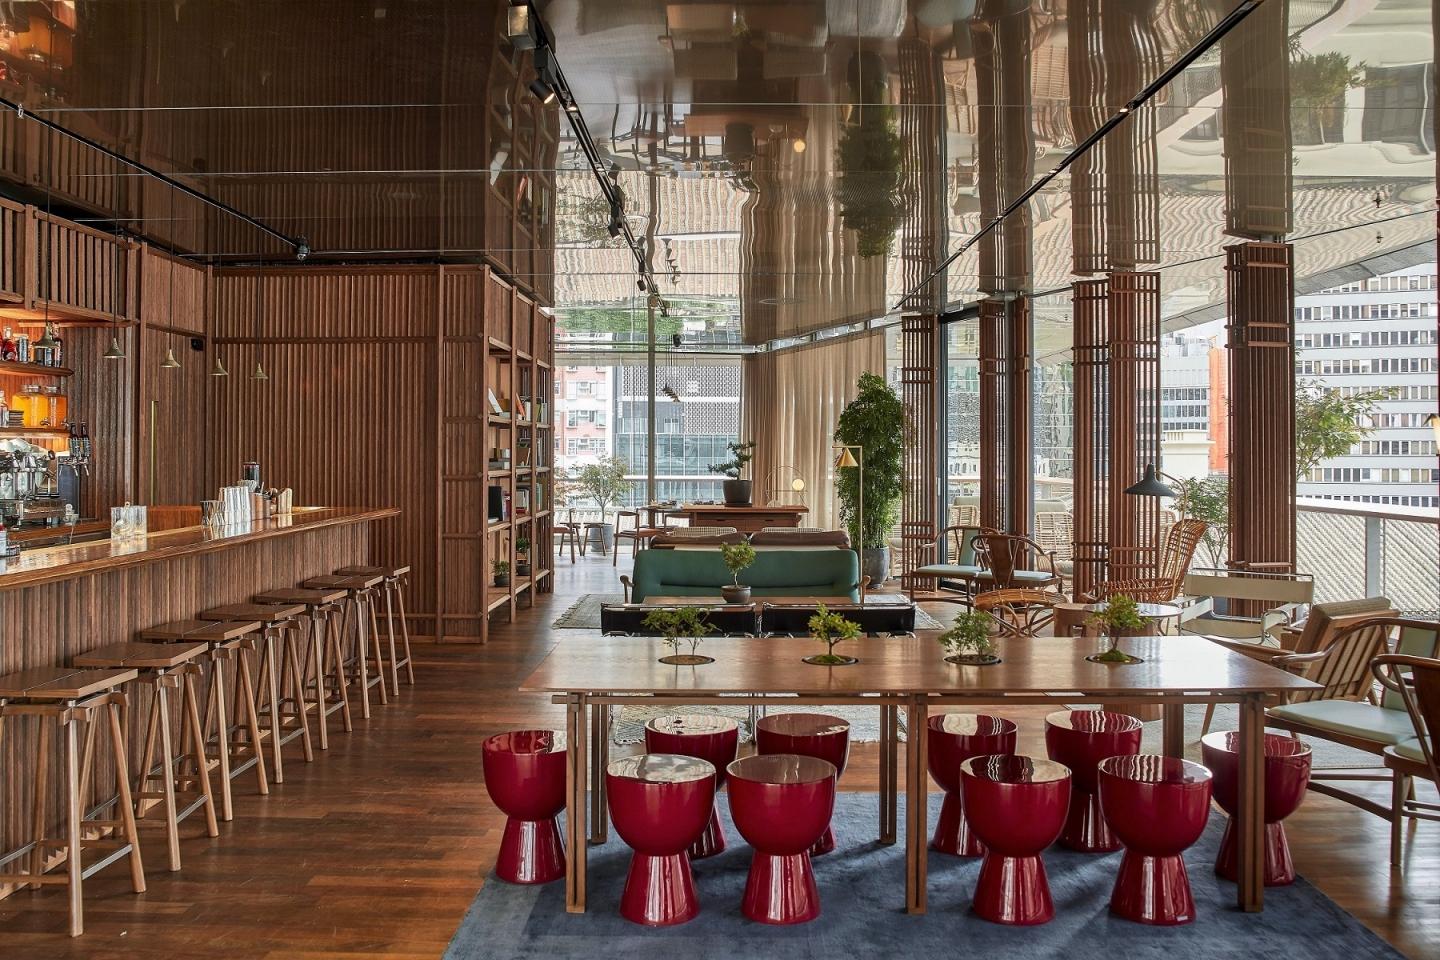 Wood dominates the contemporary interiors at Old Bailey